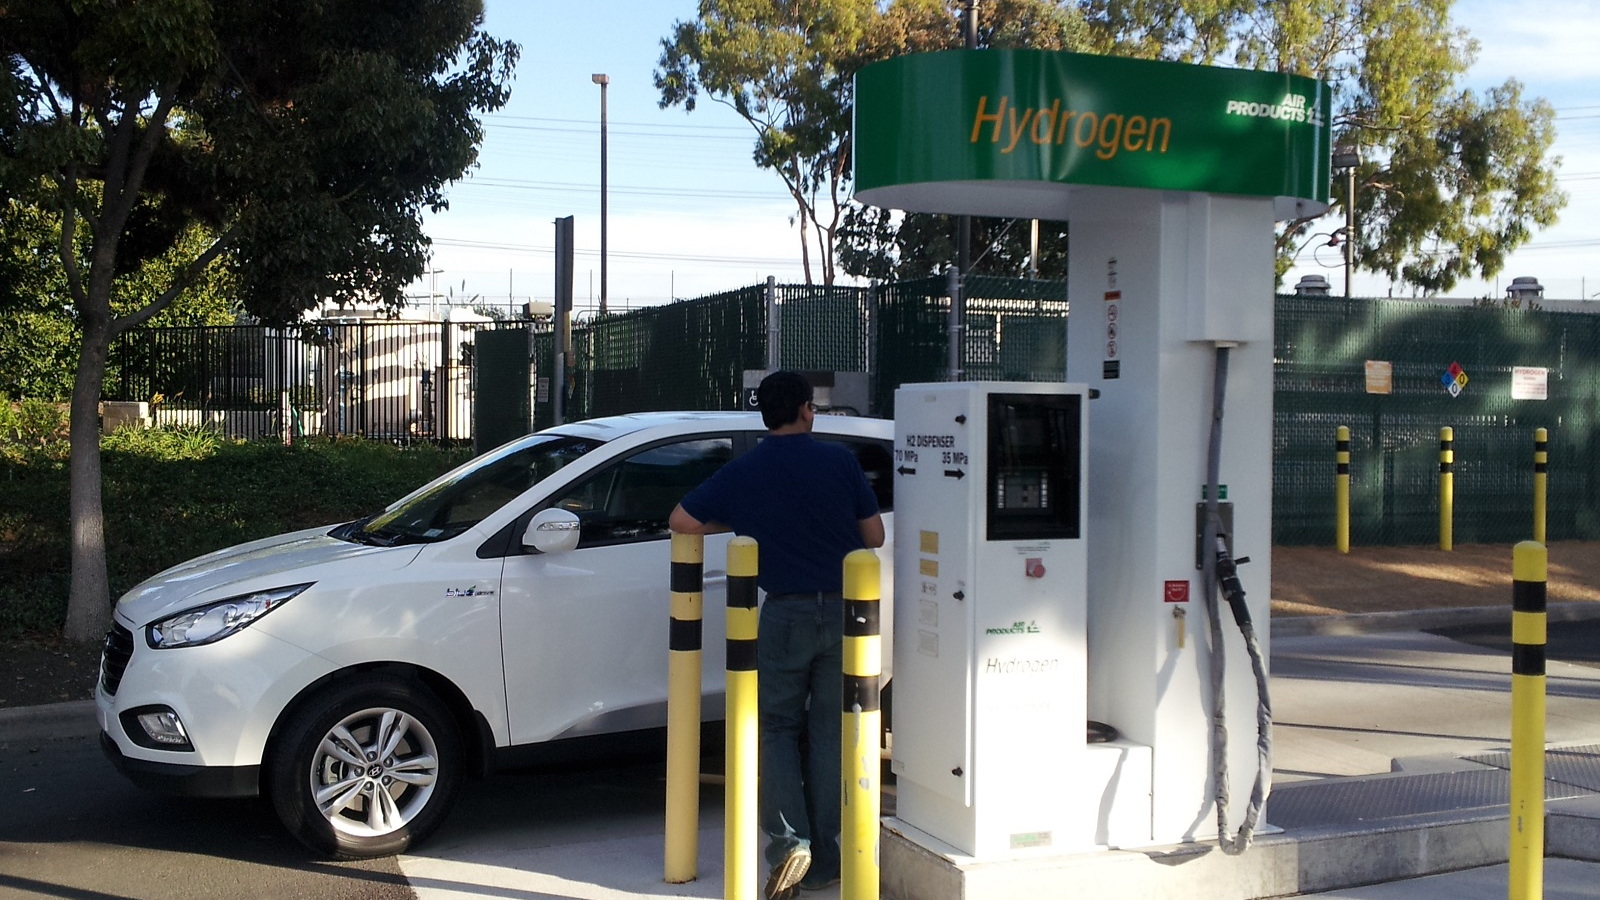 2015 Hyundai Tucson Fuel Cell at hydrogen fueling station, Fountain Valley, CA